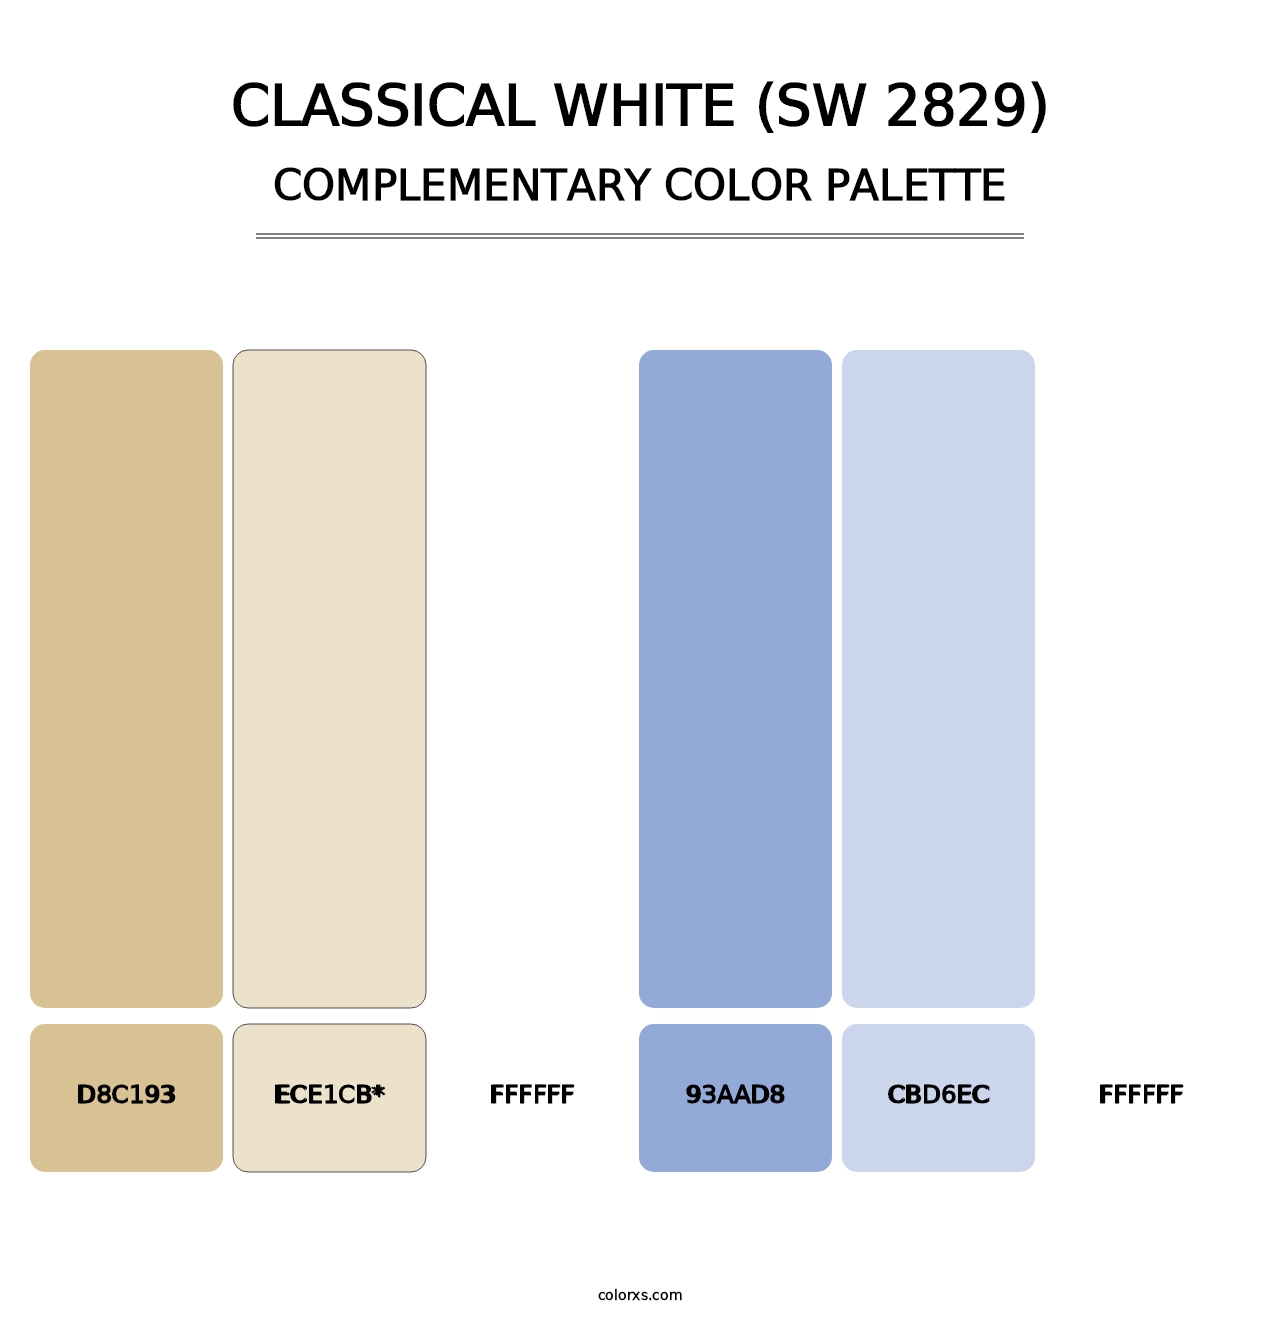 Classical White (SW 2829) - Complementary Color Palette